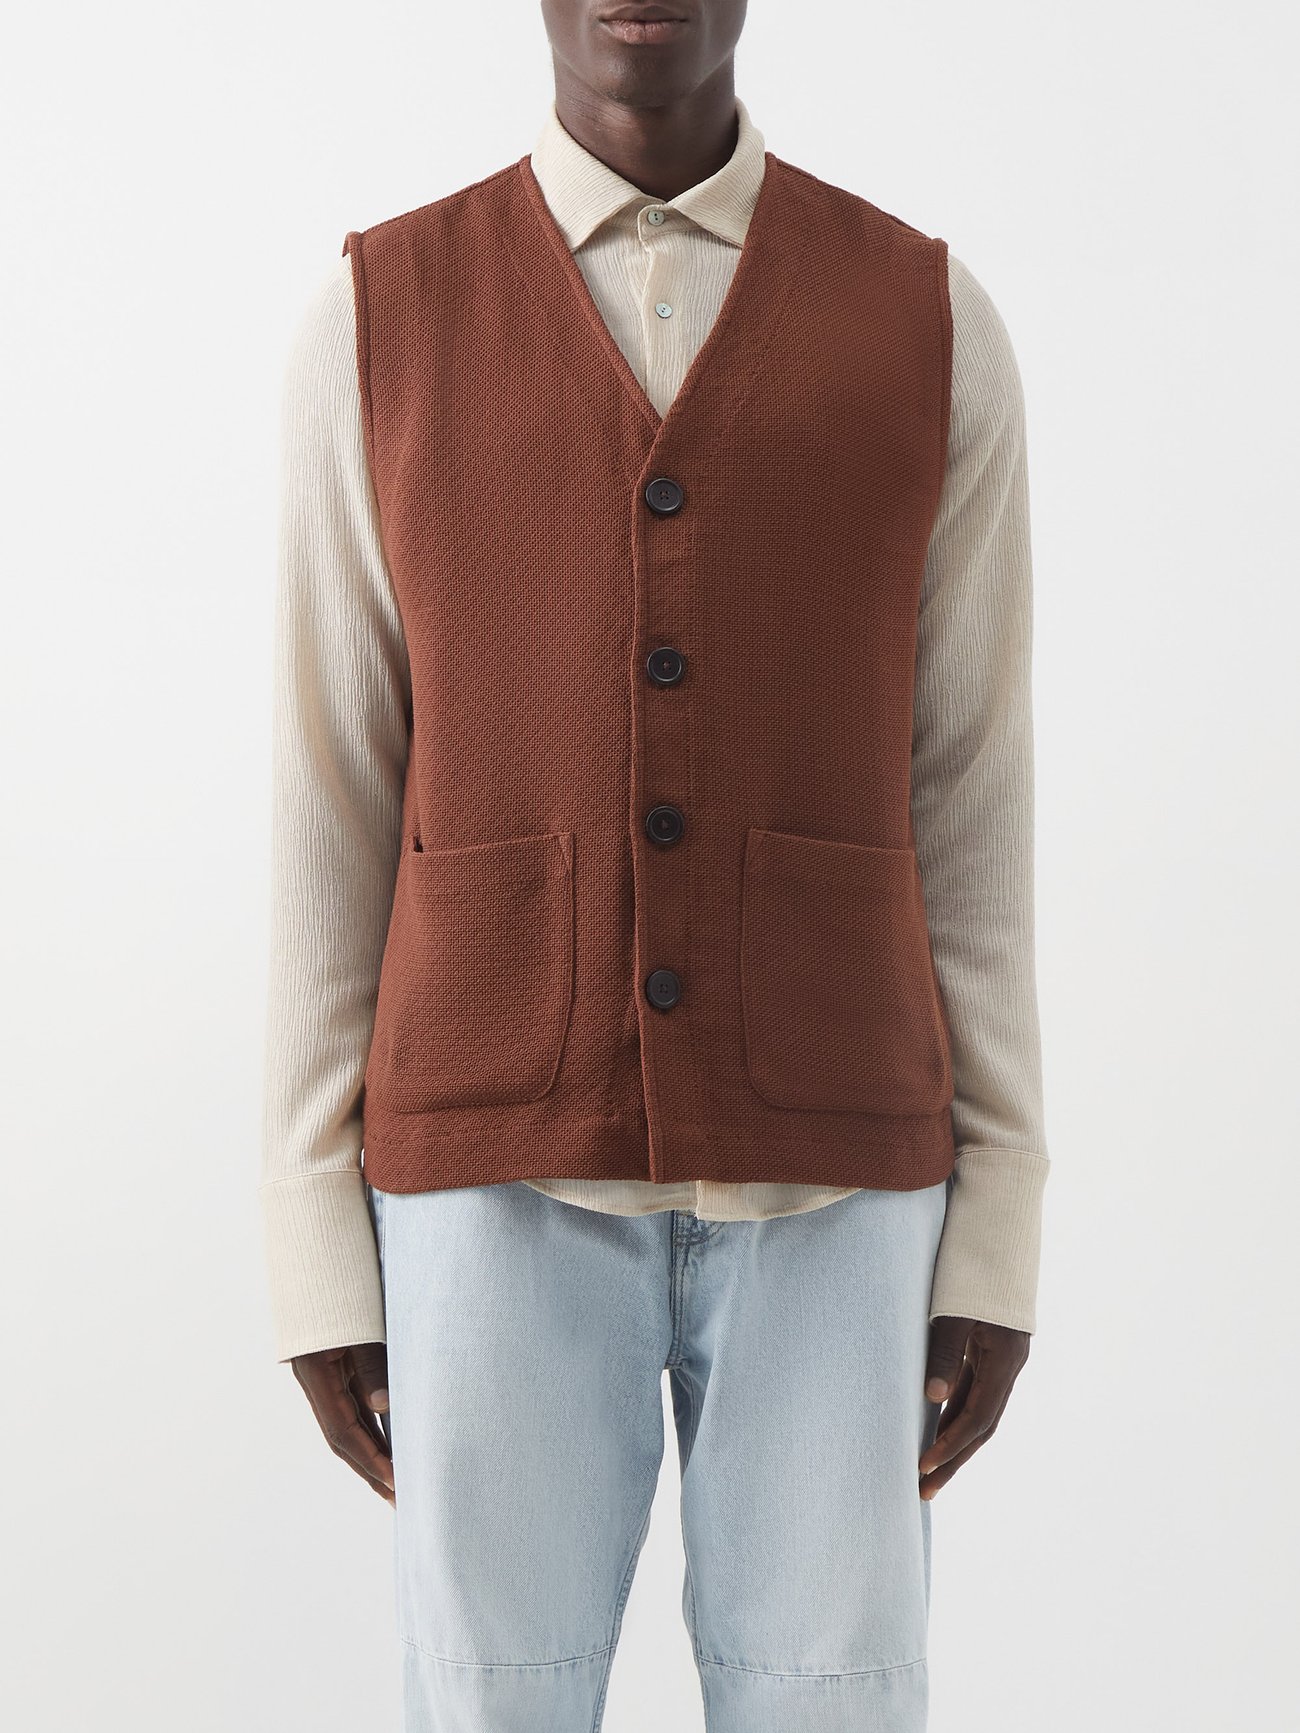 Brown Knitted cardigan sweater vest | Our Legacy 